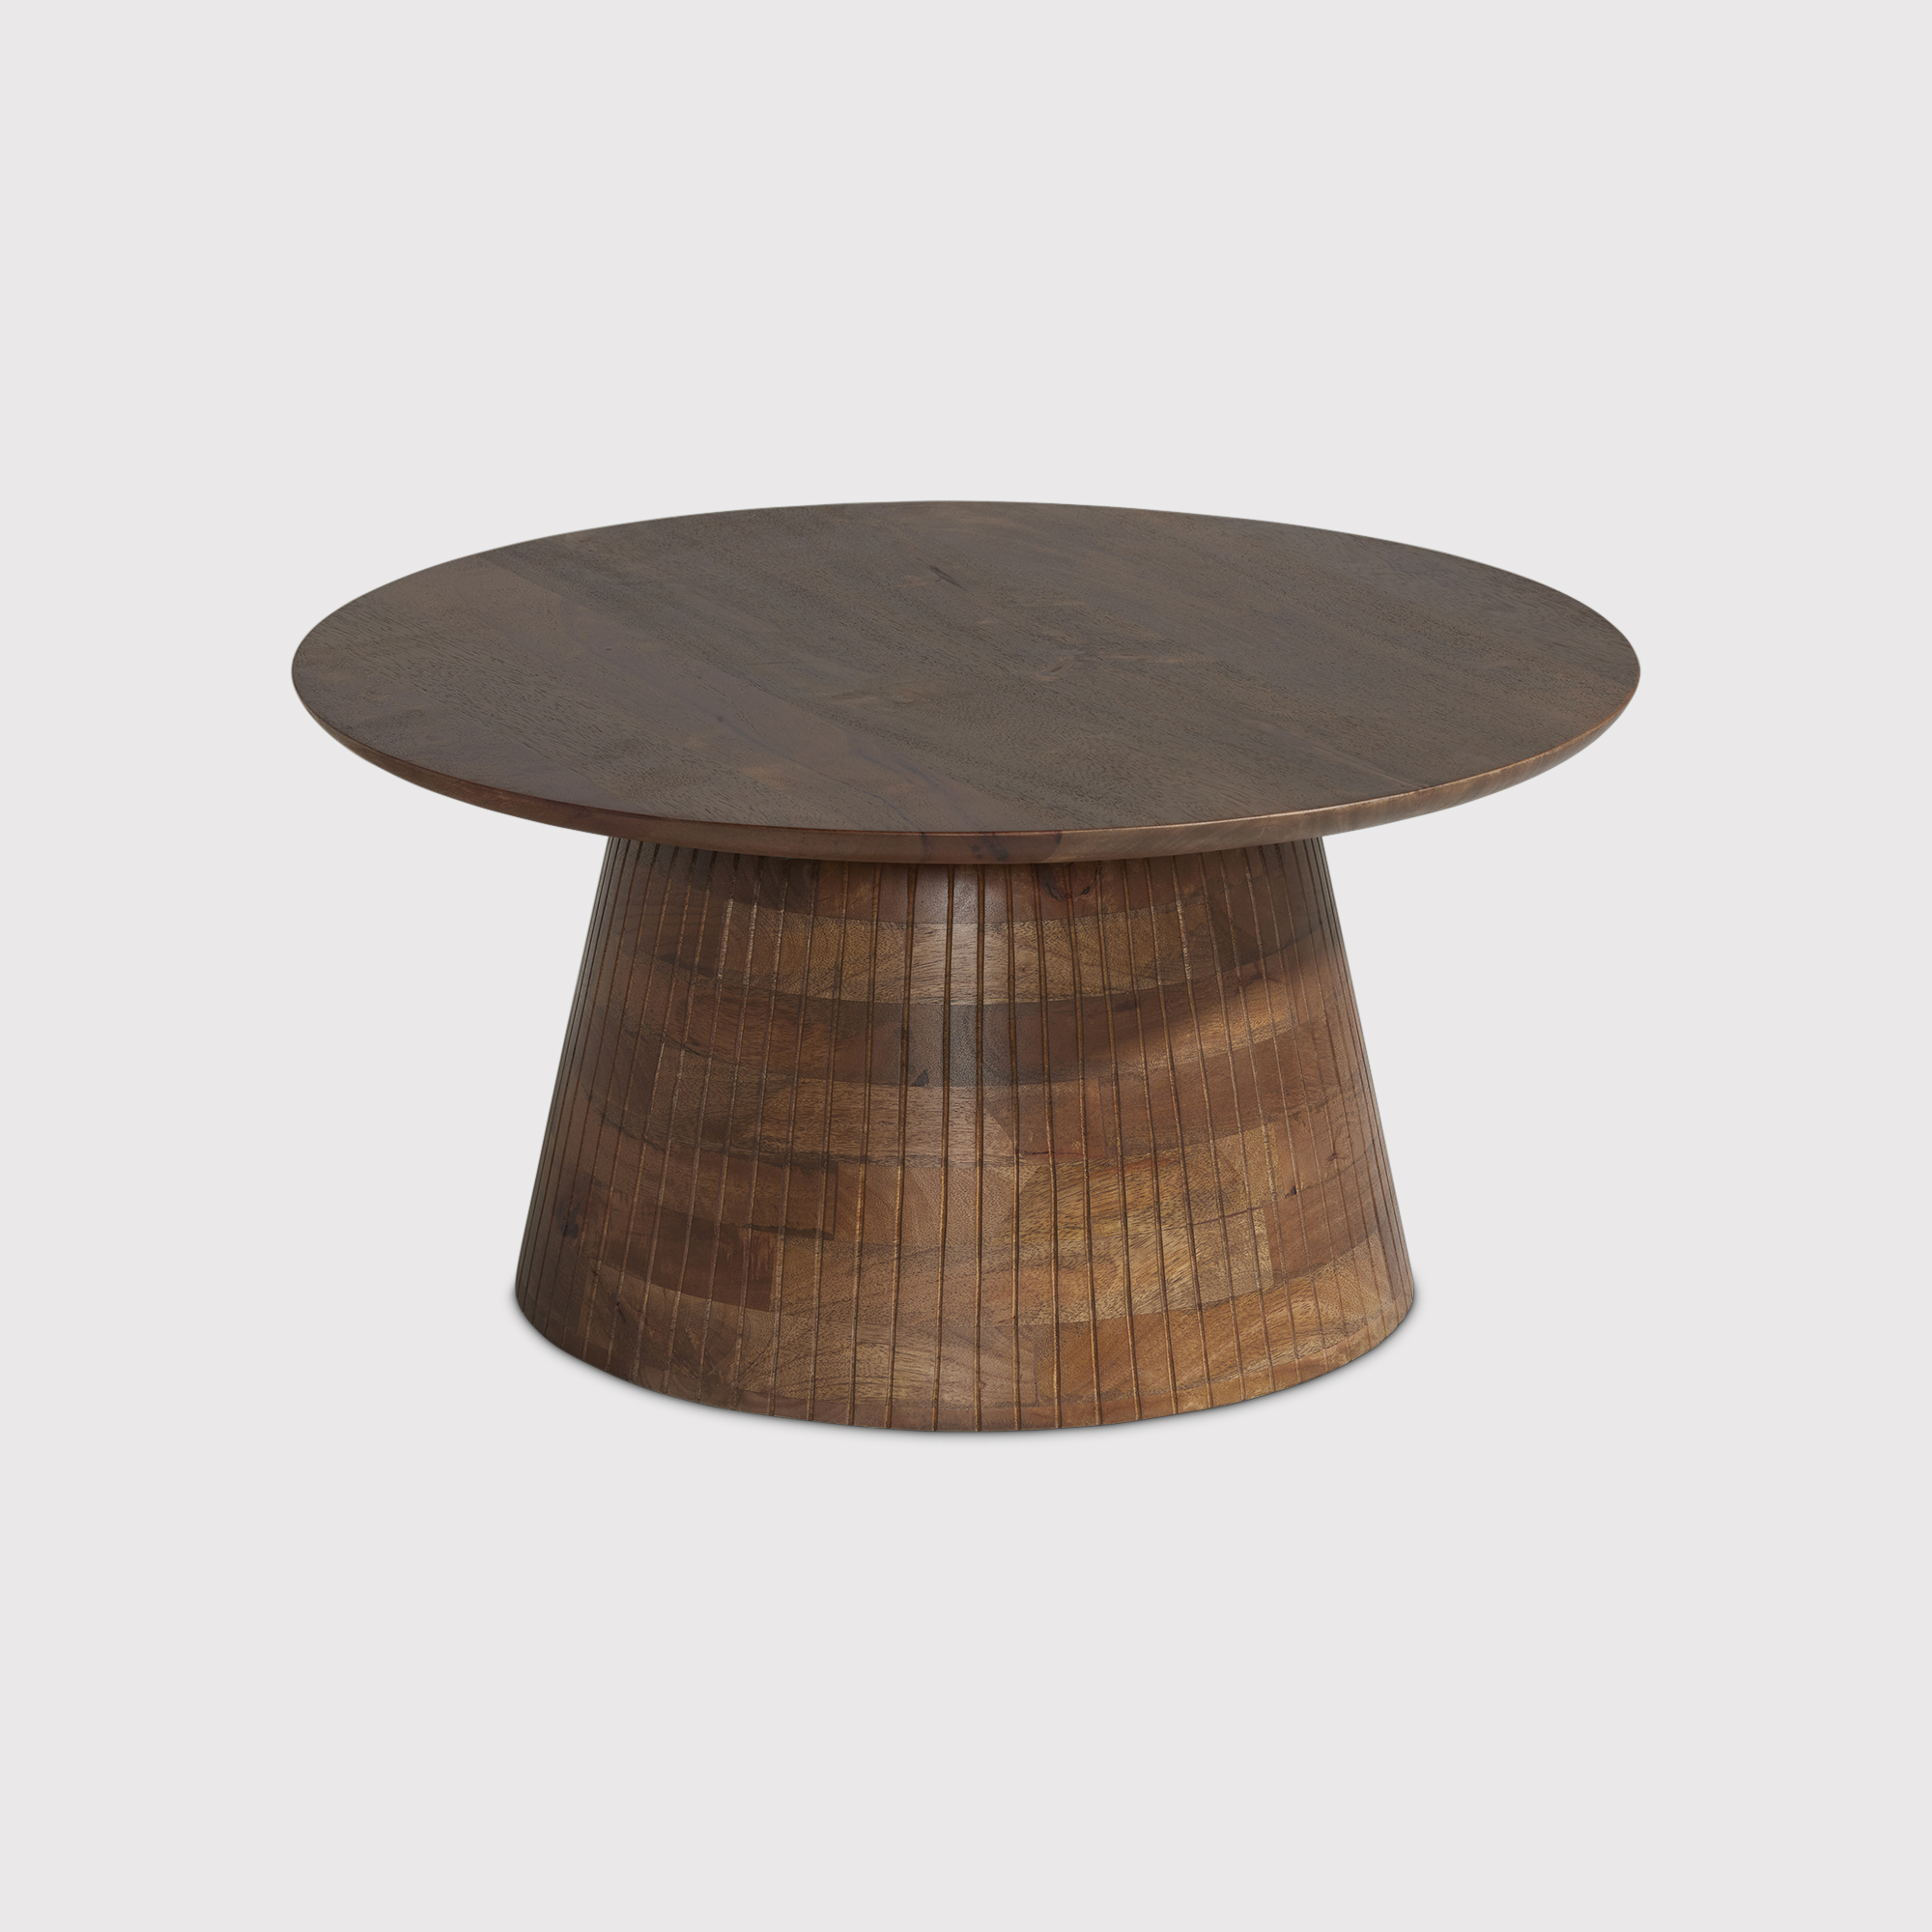 Ackley Coffee Table 70cm, Round, Mango Wood | Barker & Stonehouse